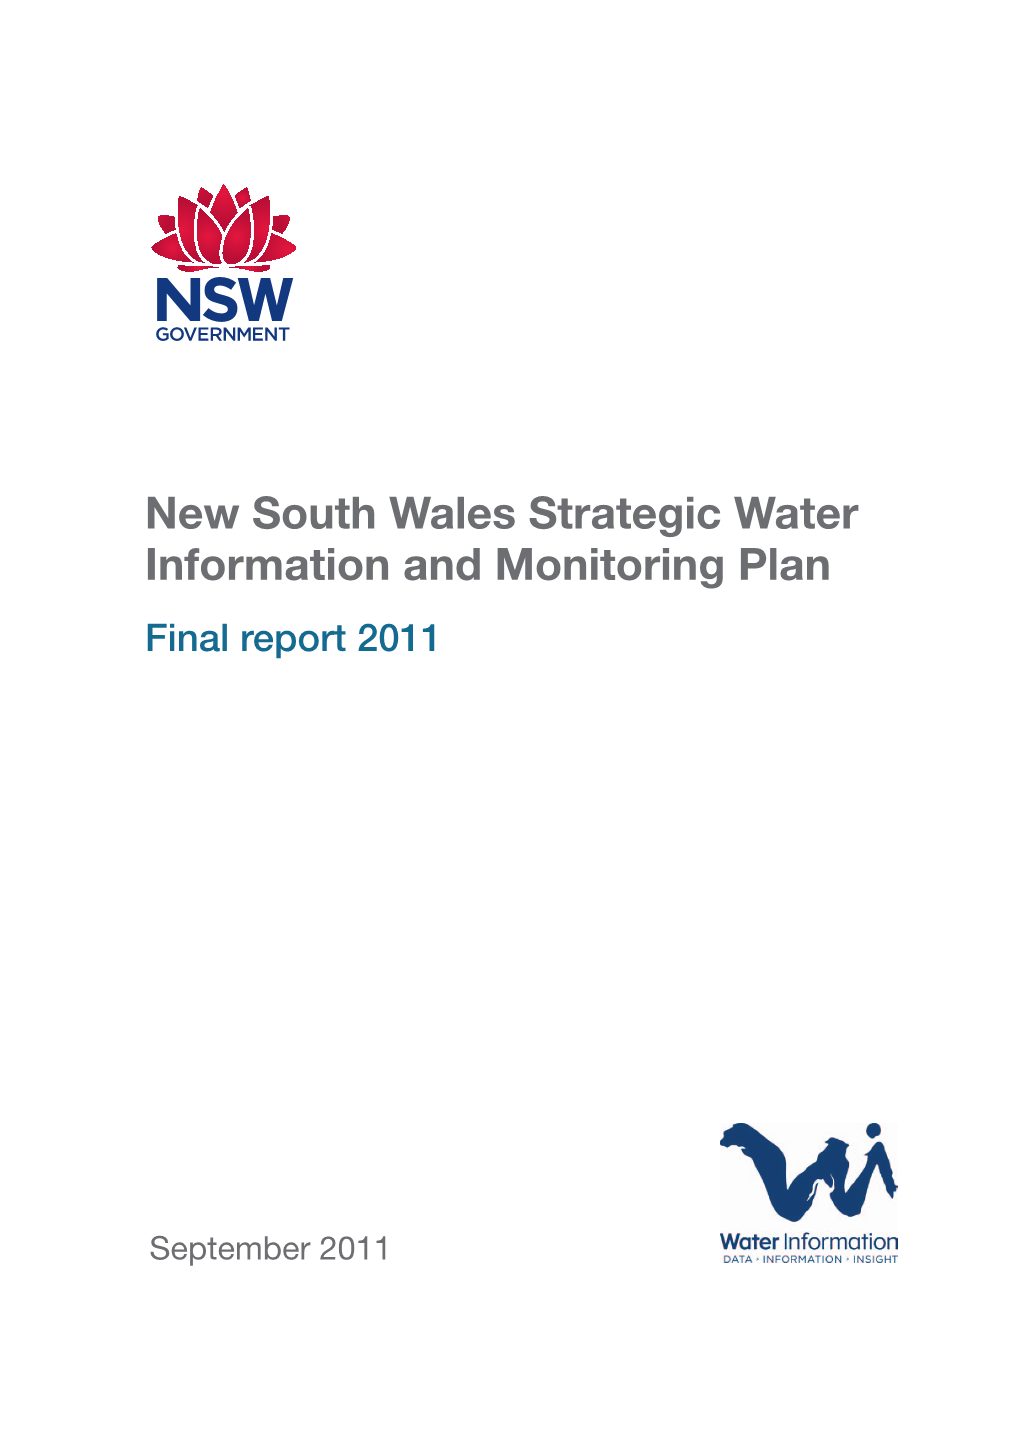 Strategic Water Information and Monitoring Plan, New South Wales